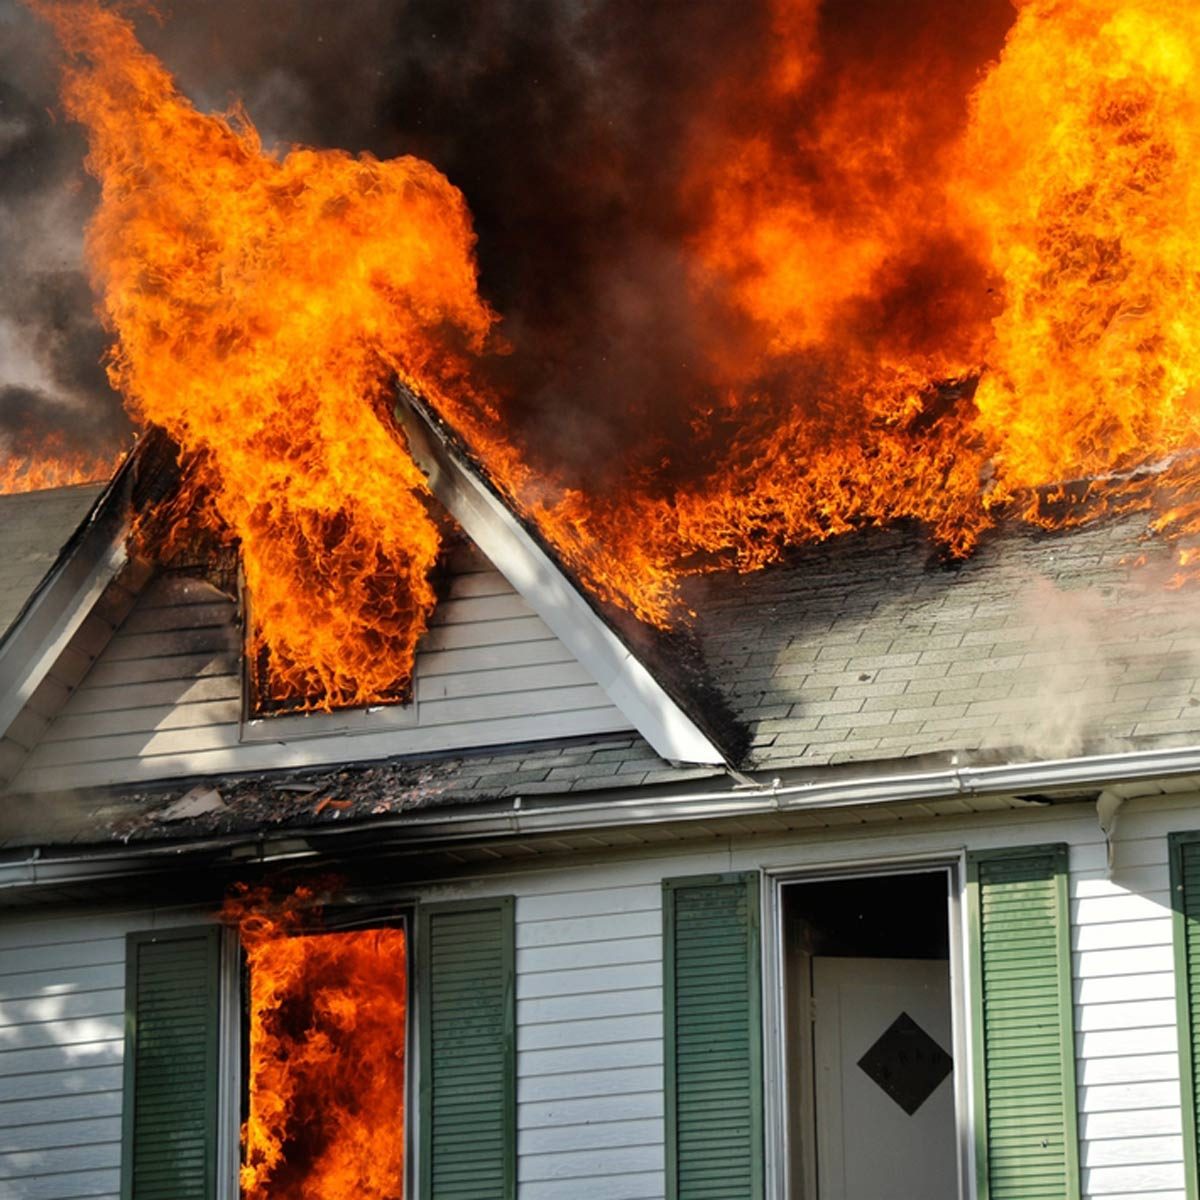 Fire Blocking Basics: What Every Homeowner Needs to Know